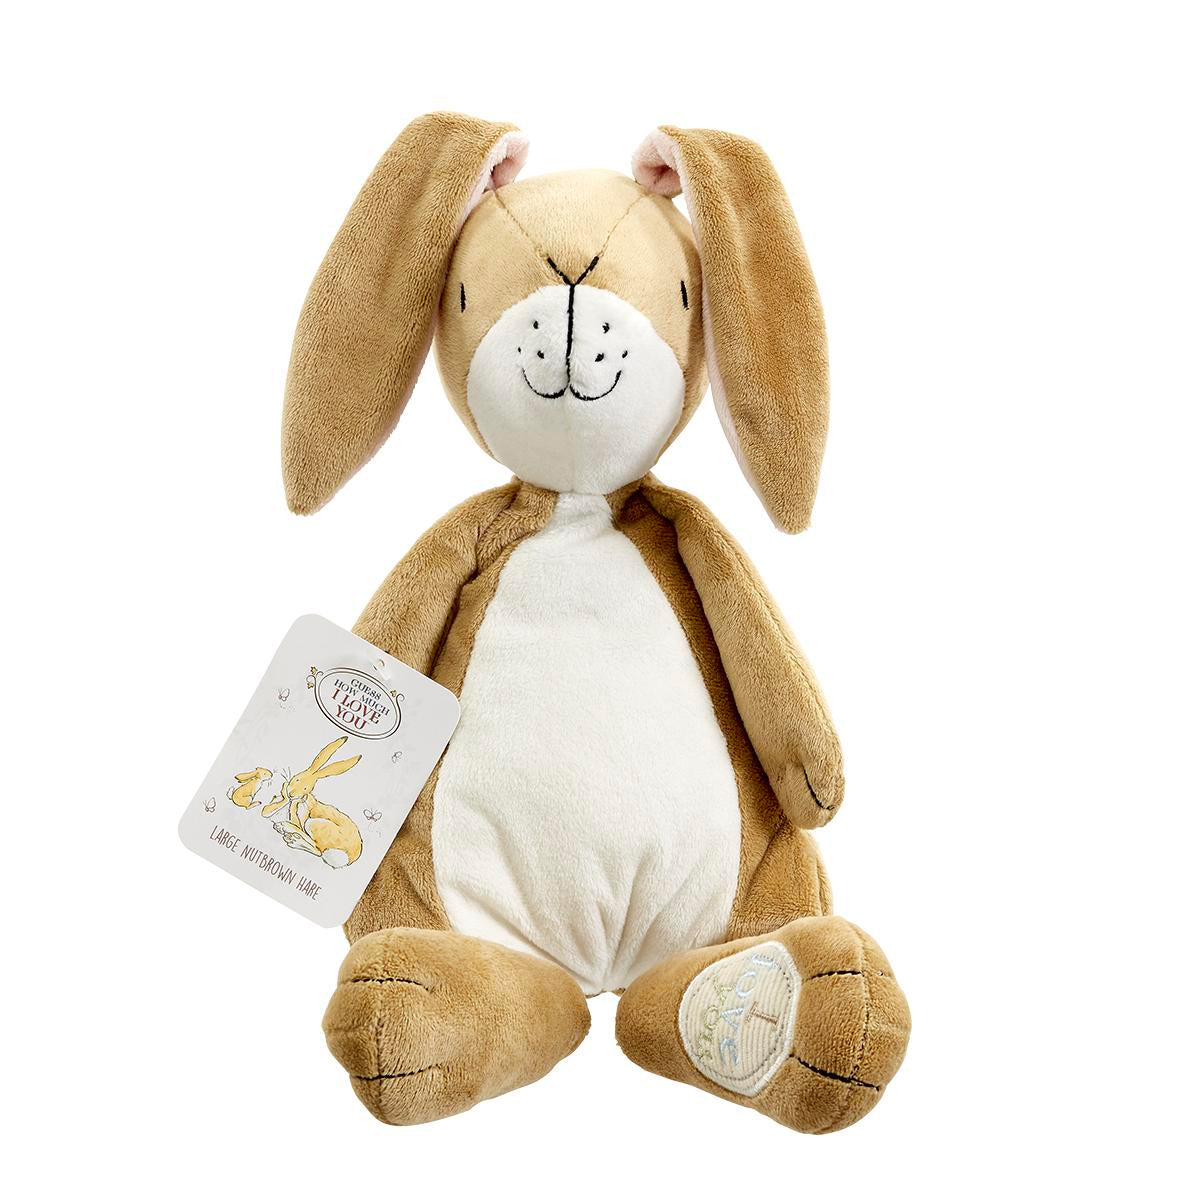 Soft Toy - Big Nutbrown Hare - Guess How Much I Love You